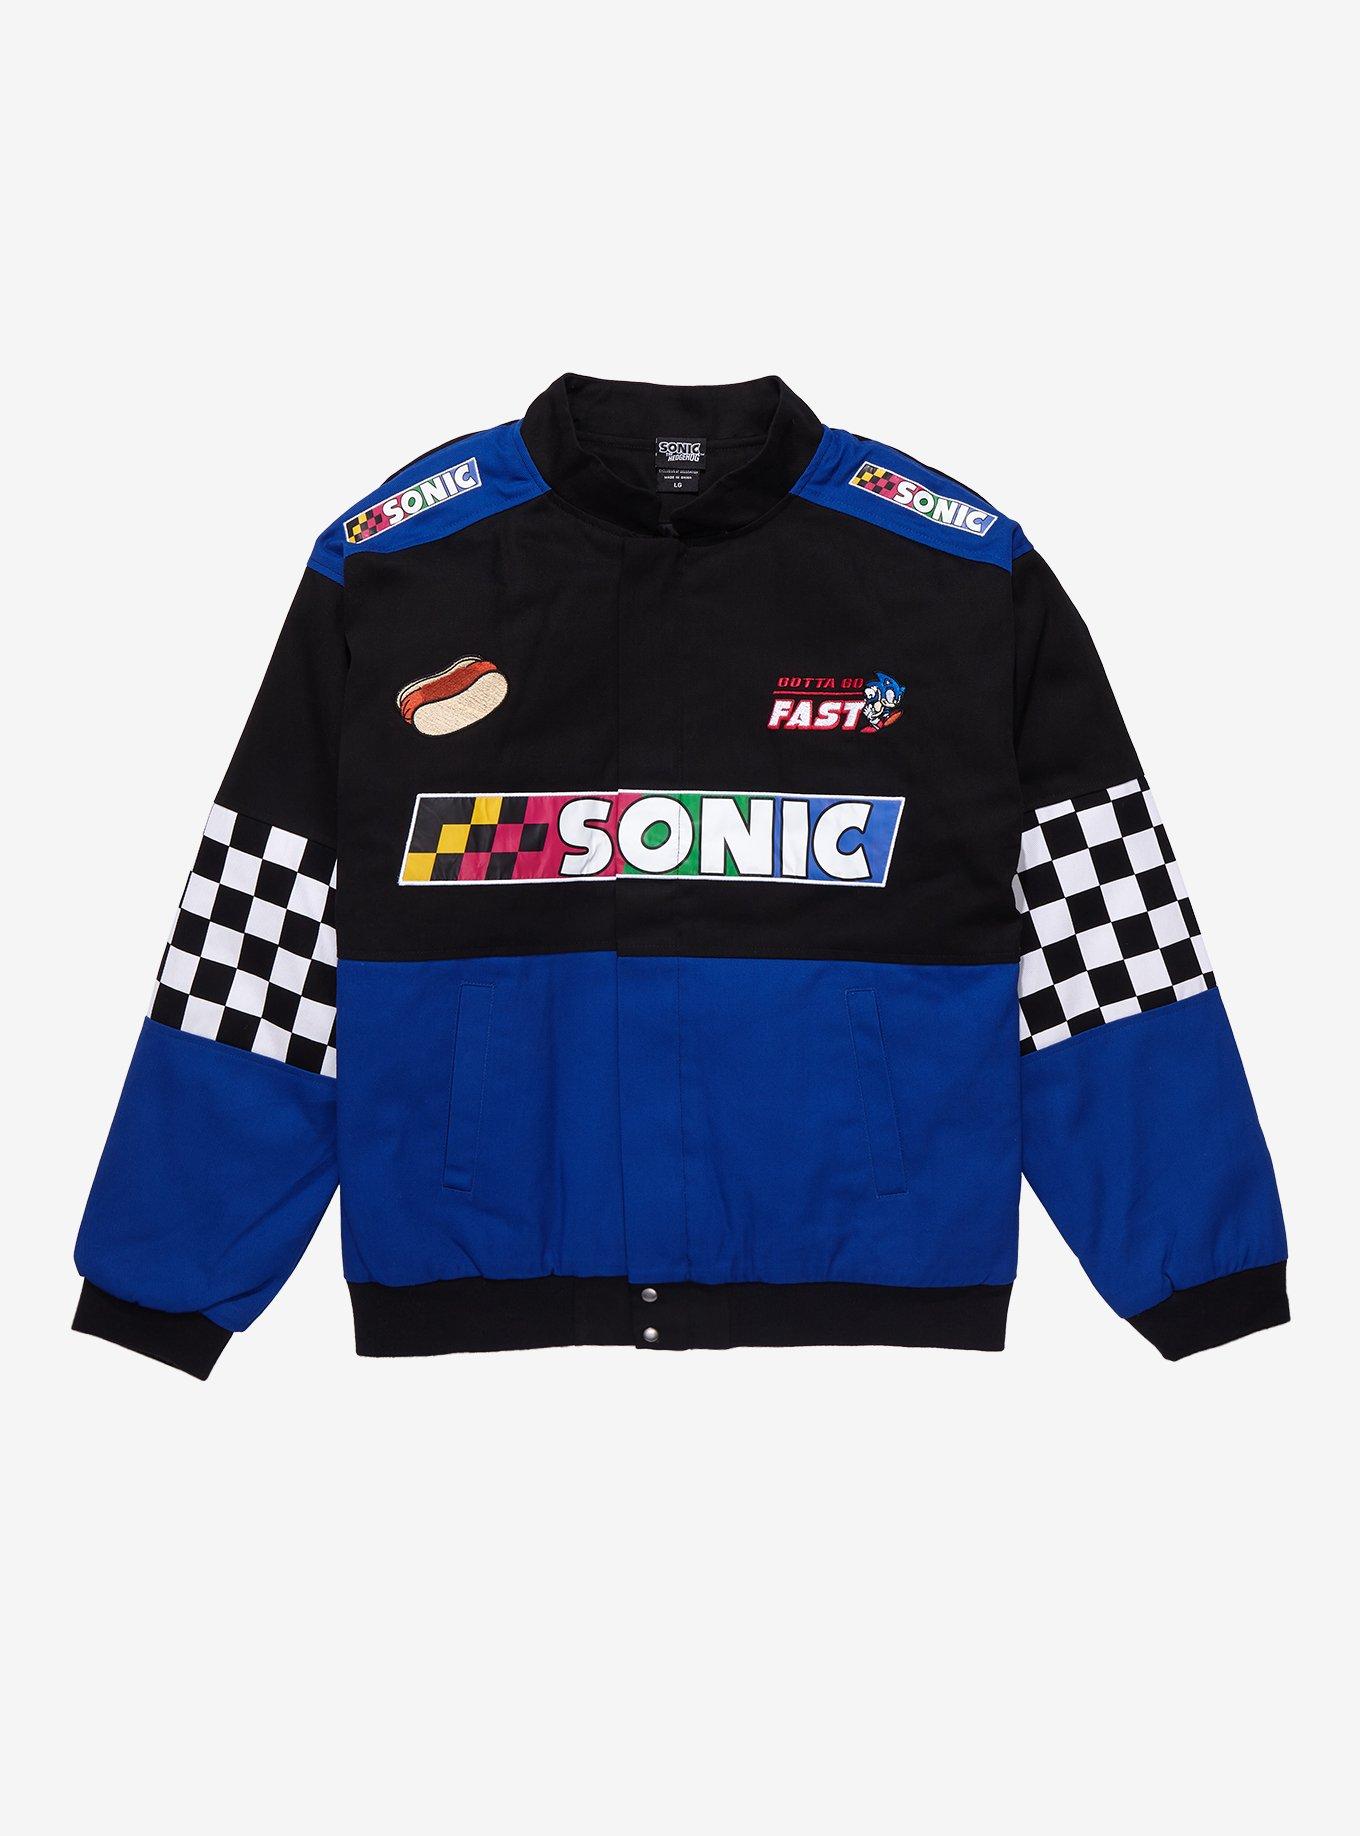 Sonic the Hedgehog Checkered Racing Jacket - BoxLunch Exclusive | BoxLunch